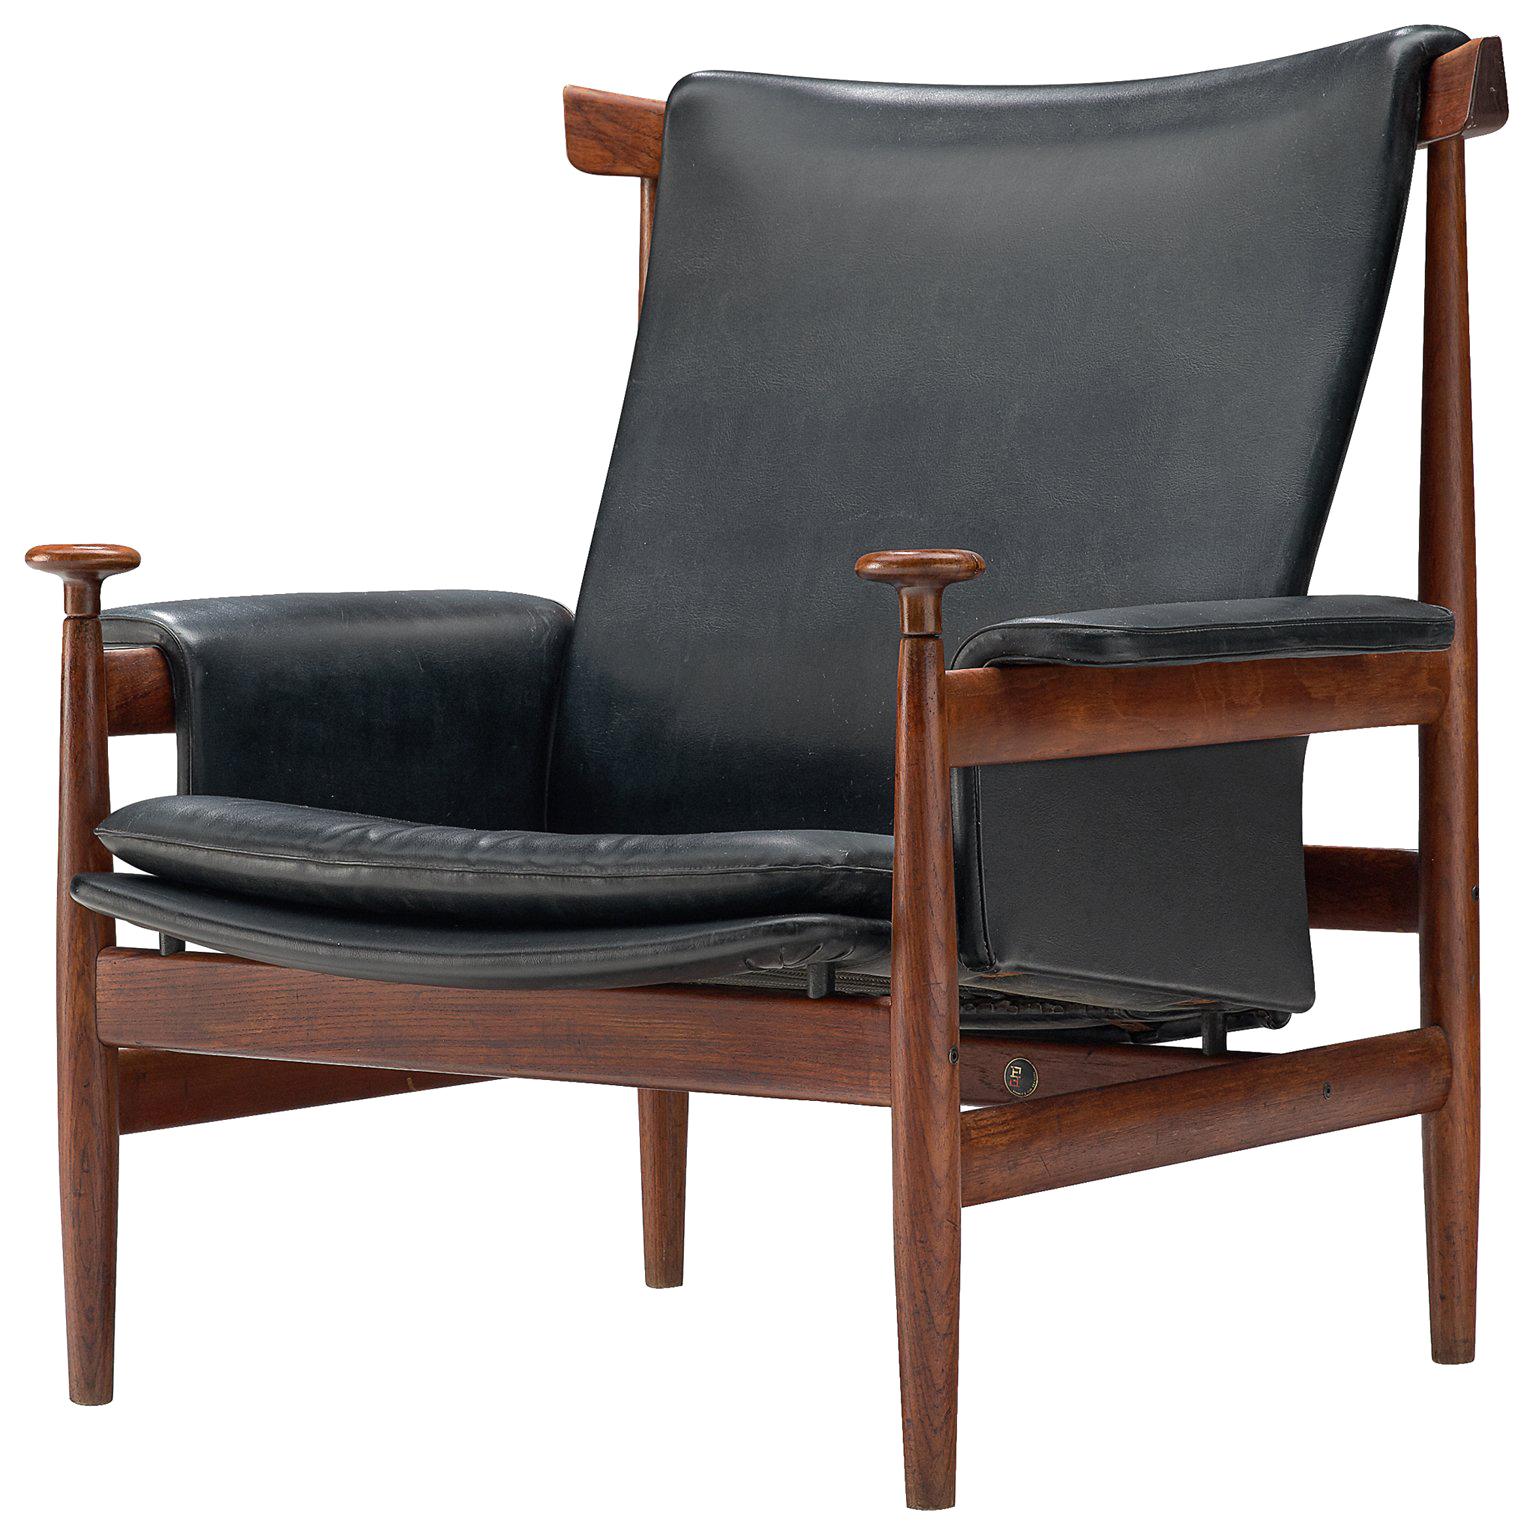 Early Finn Juhl "Bwana" Chair with Black Leather